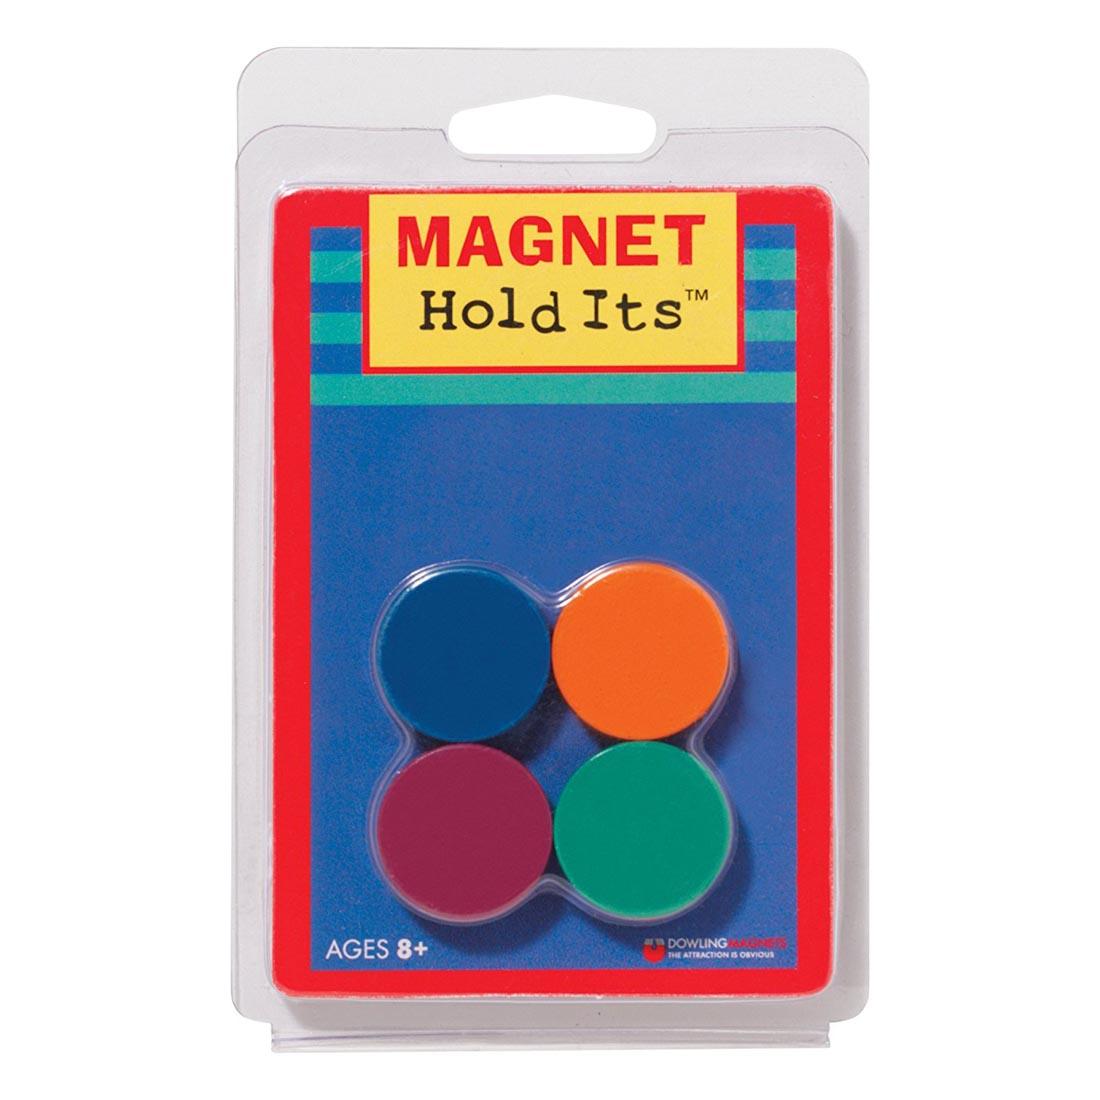 Package of 8 Colorful Hold Its Disc Magnets by Dowling Magnets